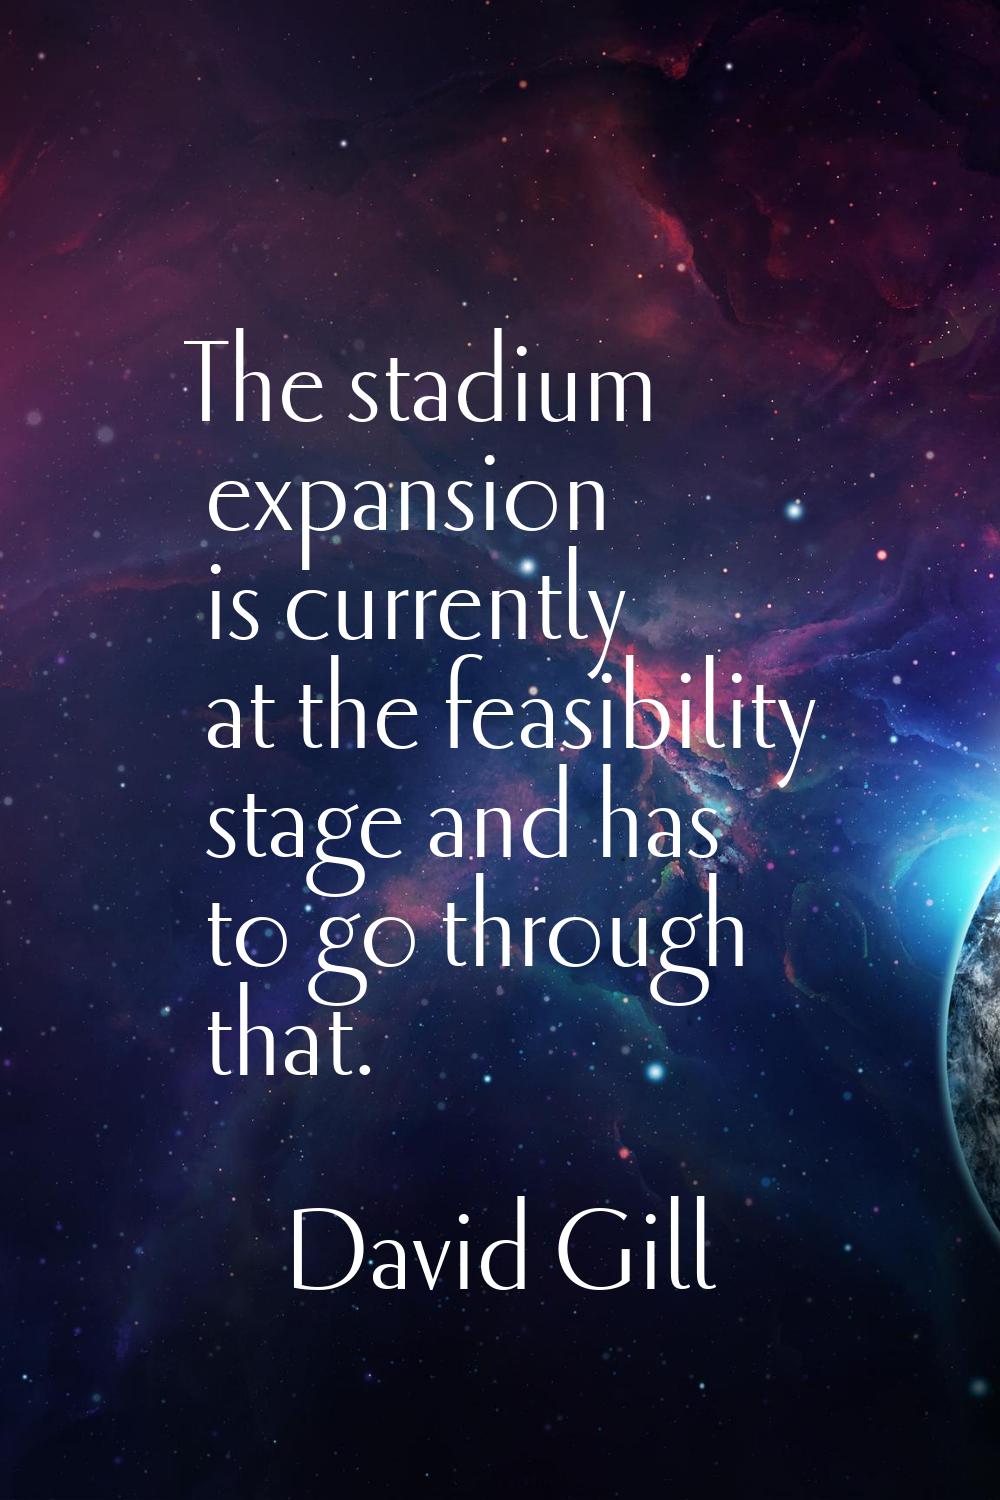 The stadium expansion is currently at the feasibility stage and has to go through that.